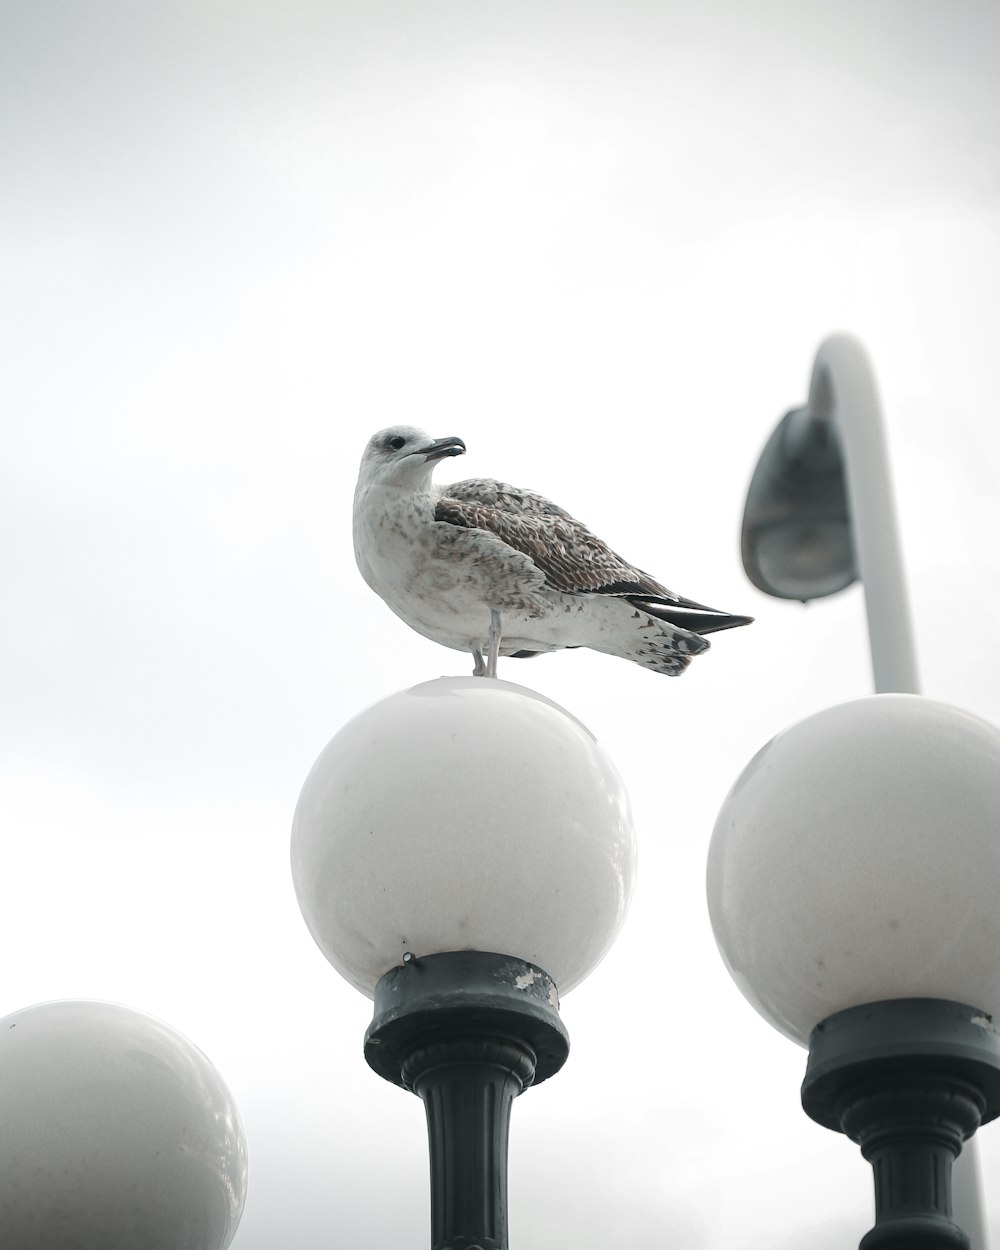 a seagull sitting on top of a street light